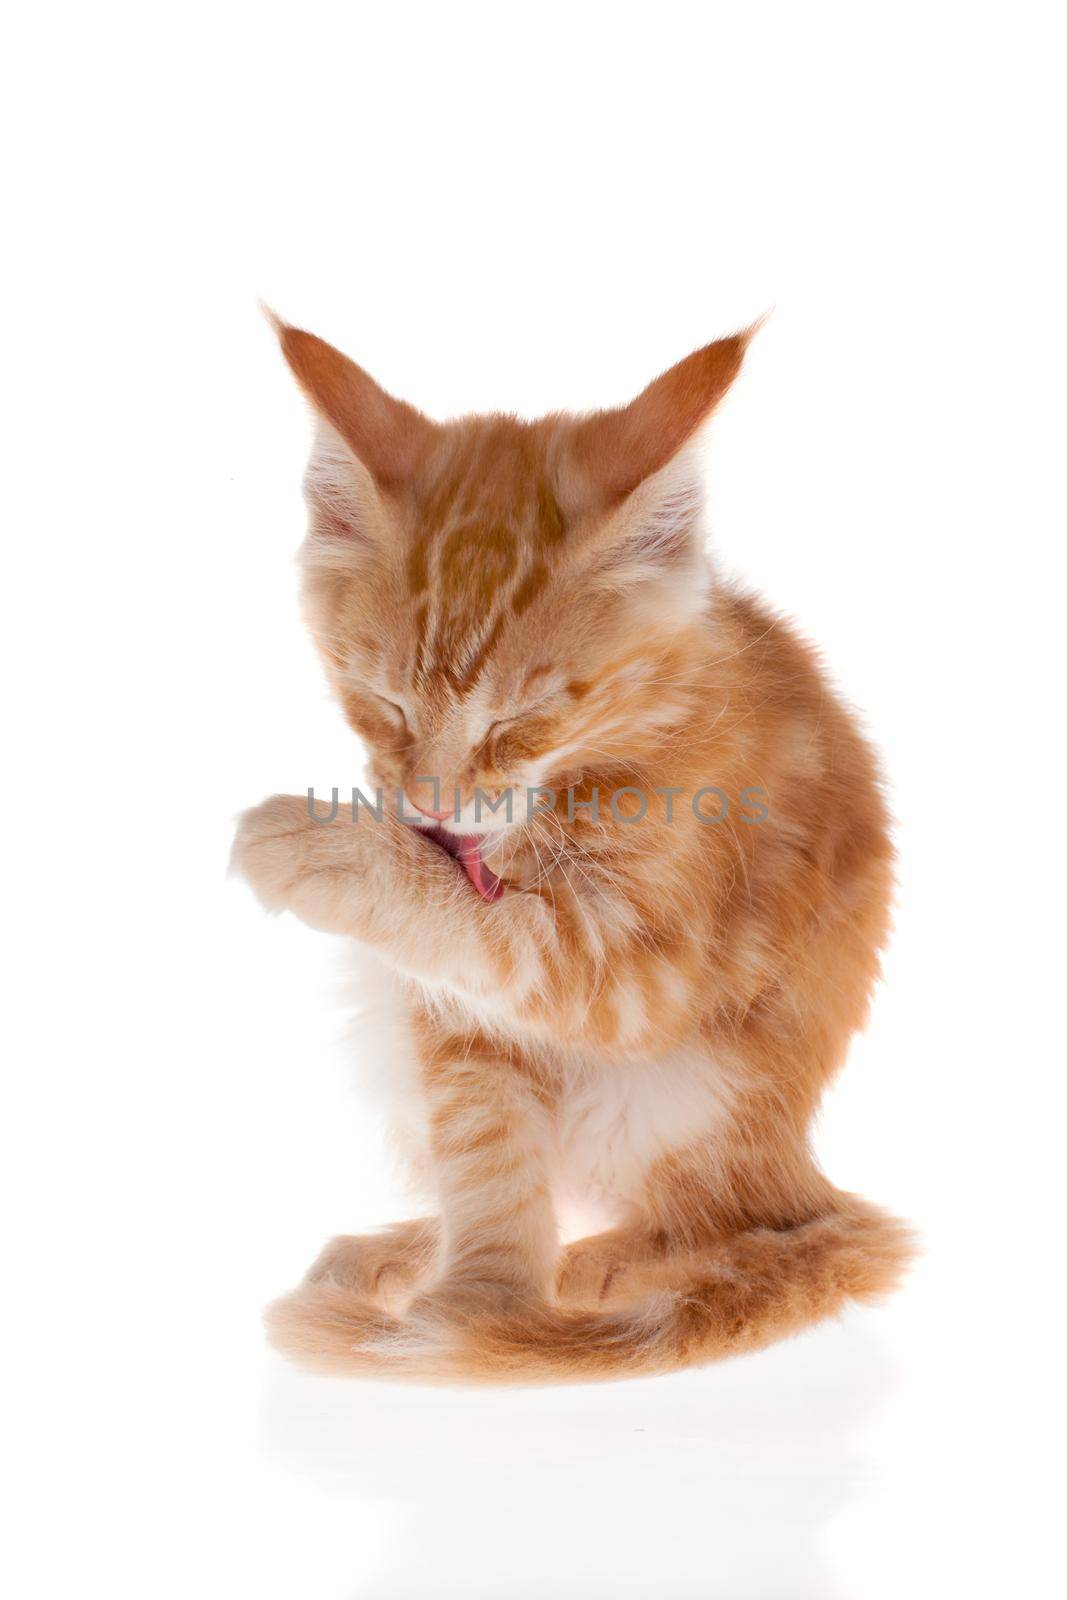 Red Maine Coon cat isolated on white background